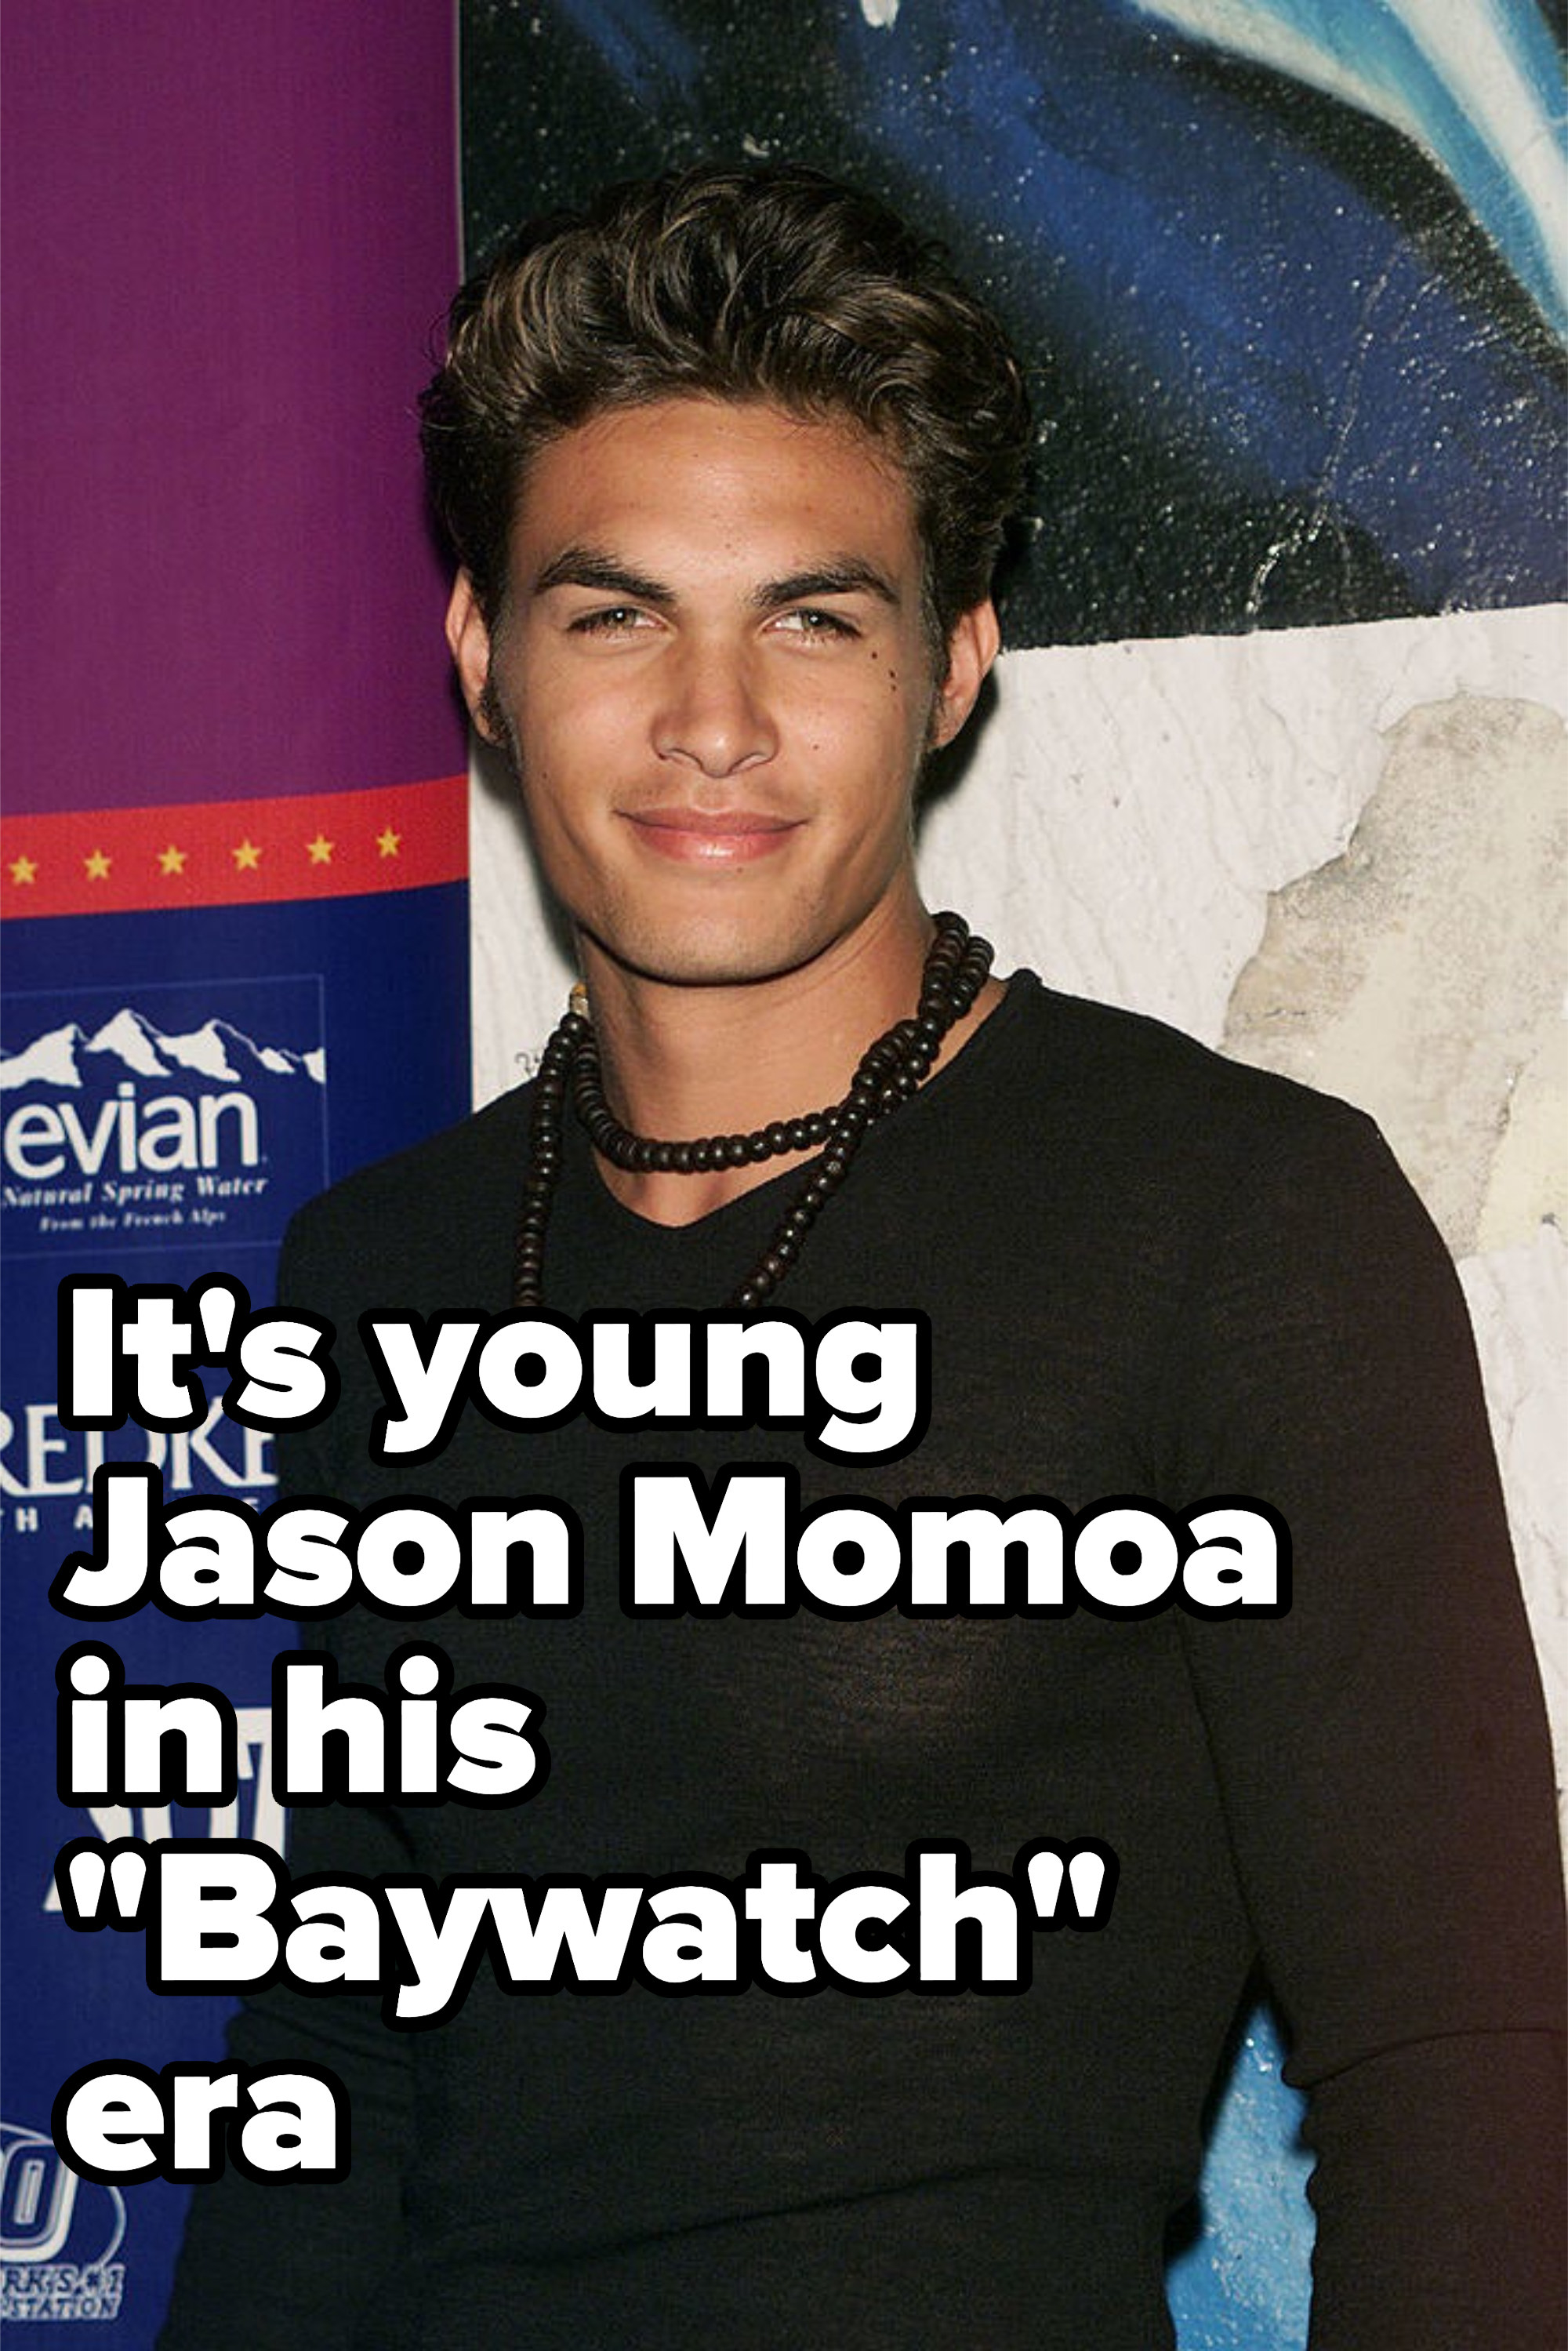 young jason momoa in a tight black shirt